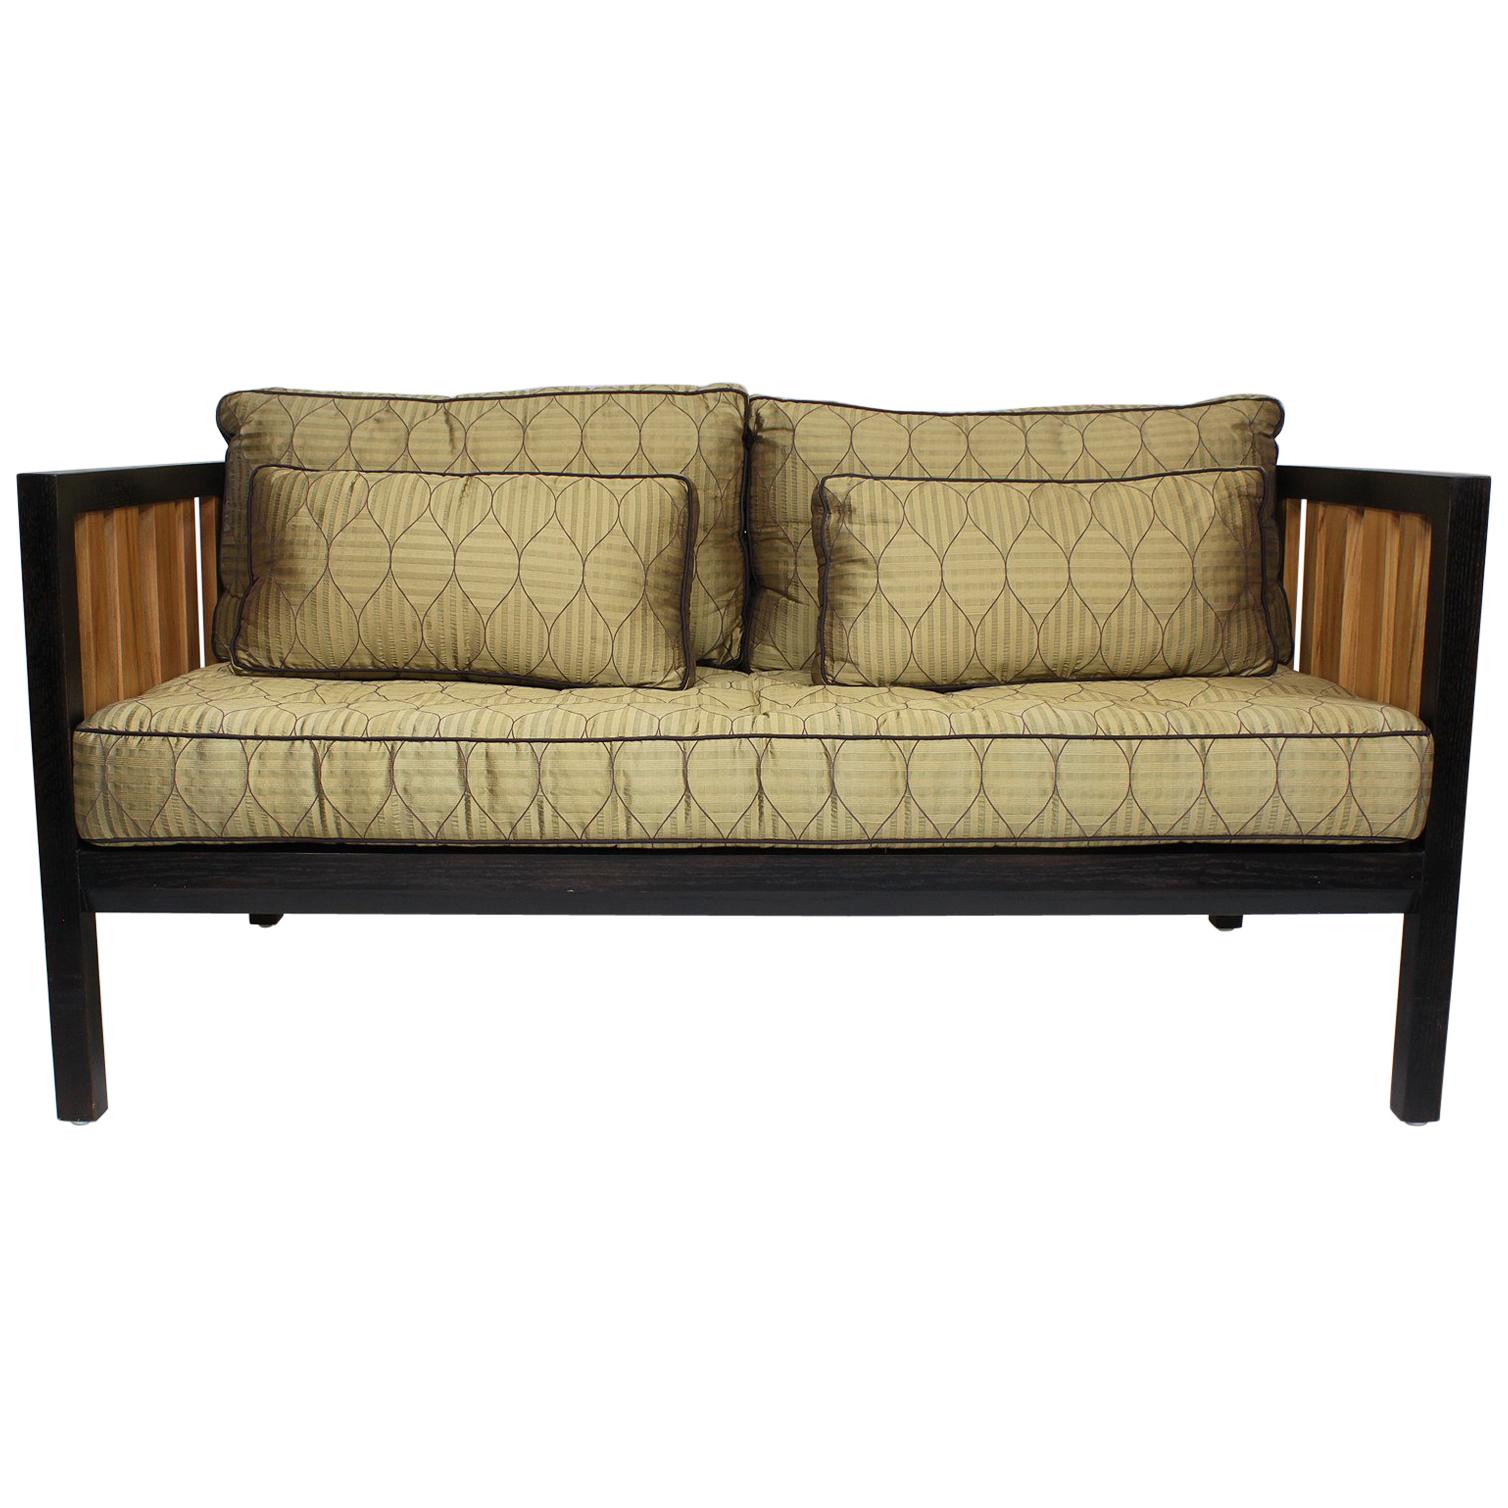 Mahogany and Ash Loveseat, Settee after a Design by Edward Wormley for Dunbar For Sale